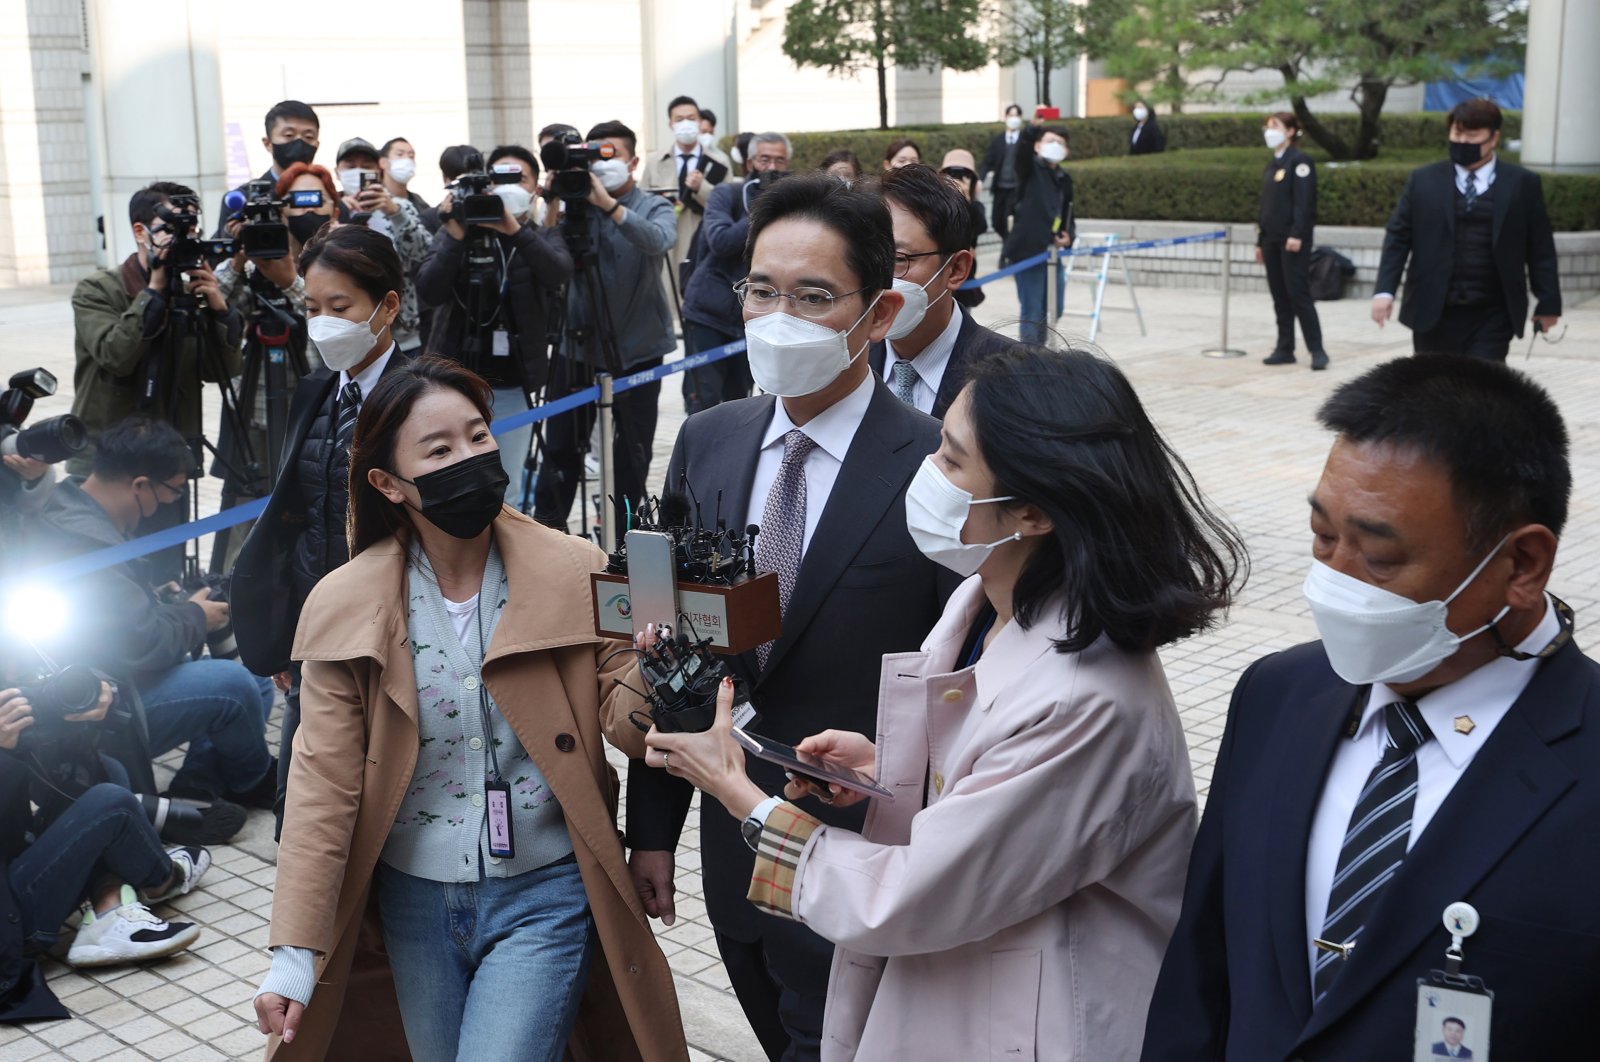 Samsung Electronics Co. Vice Chairperson Lee Jae-yong (C) leaves the Seoul Central District Court in Seoul, South Korea, Oct. 26, 2021. (EPA Photo)